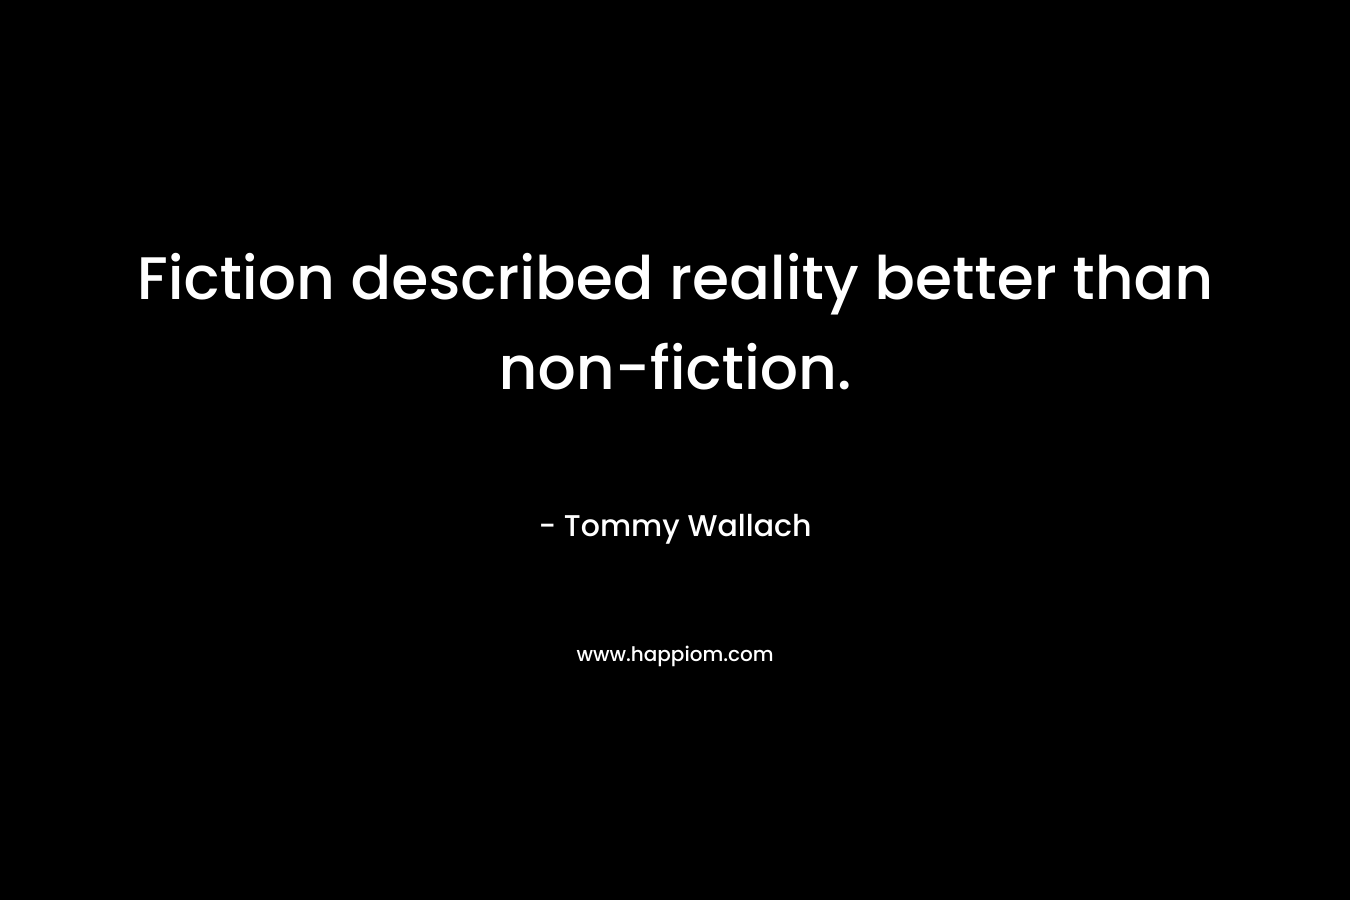 Fiction described reality better than non-fiction.